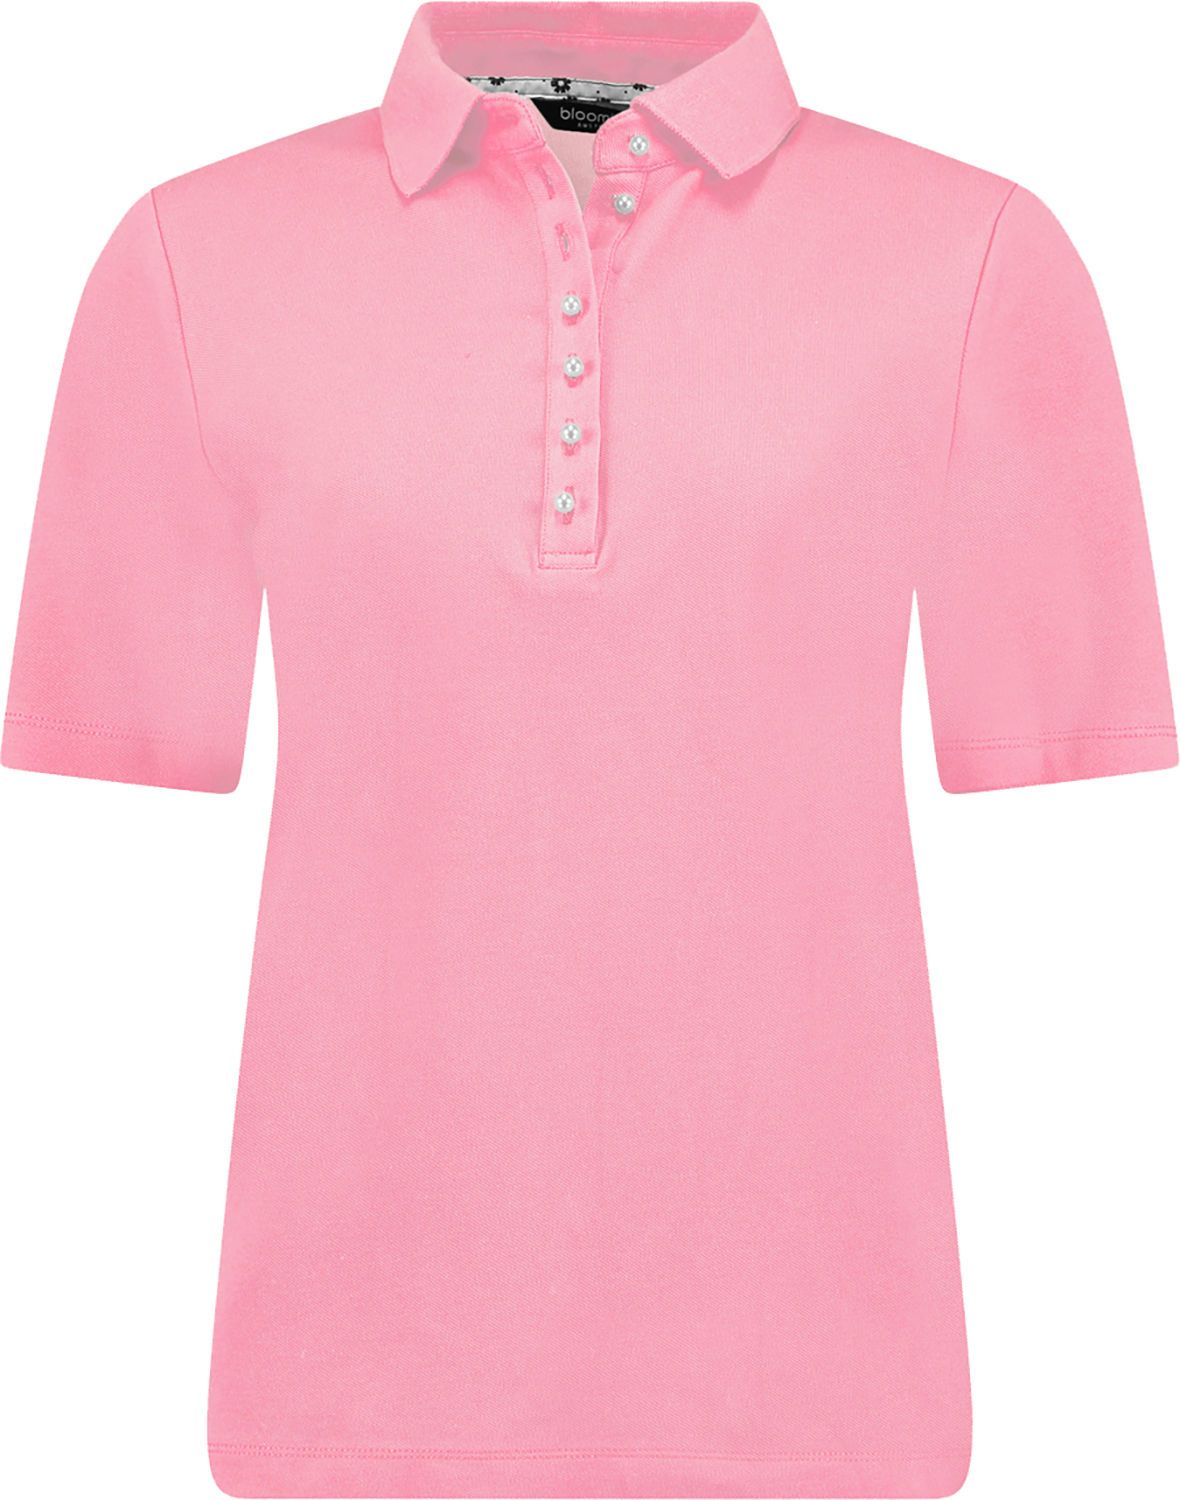 polo shirt pearl buttons Roze